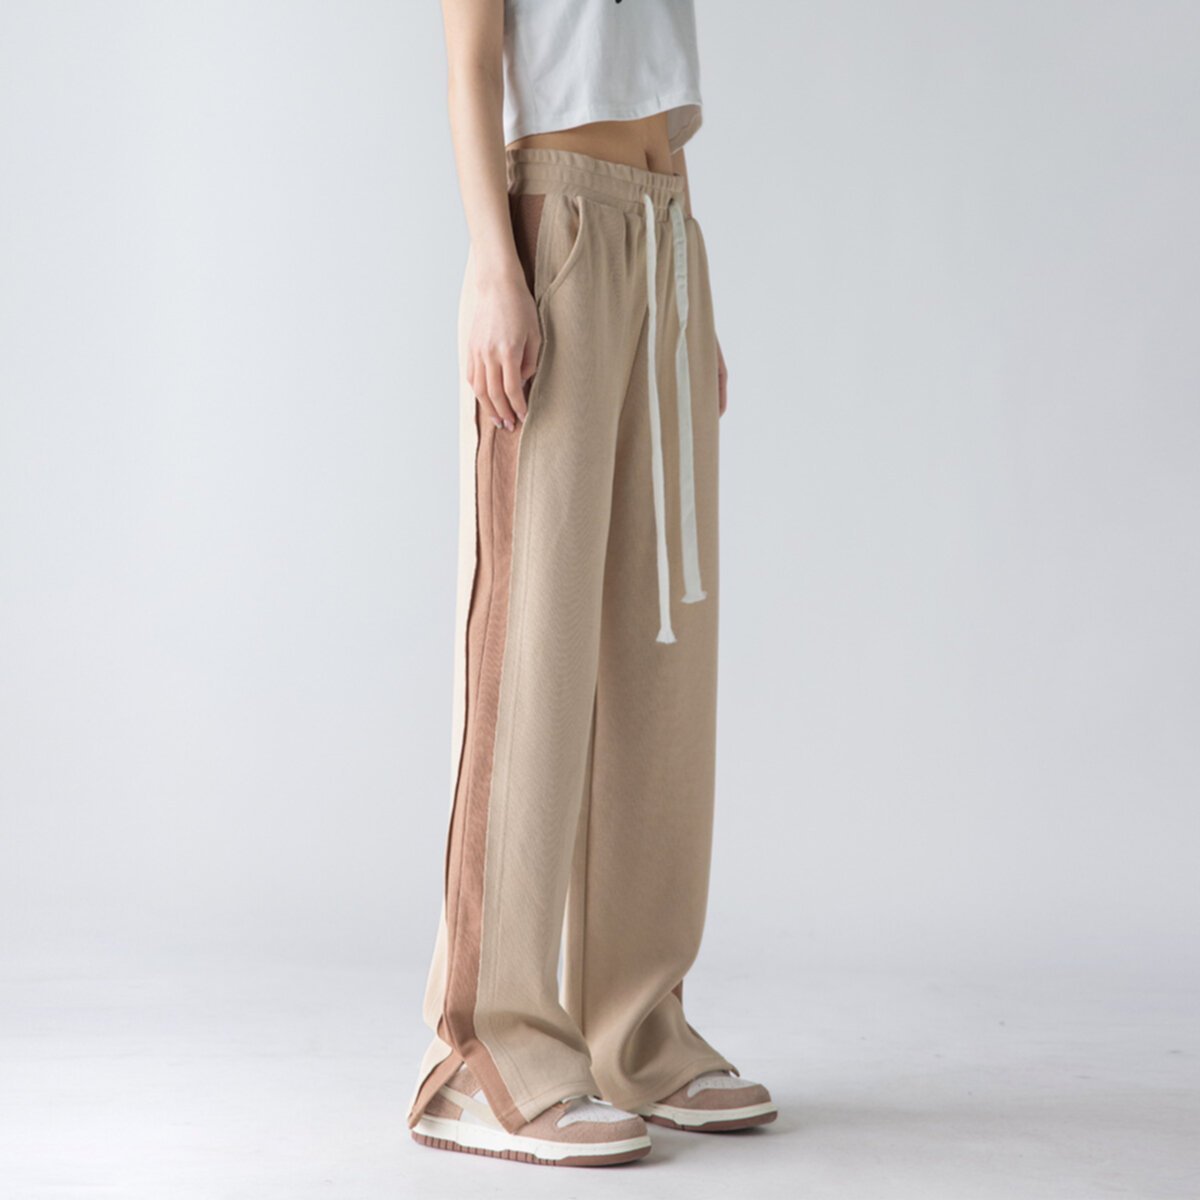 Spring and Autumn New Split Wide Leg Casual Sports Pants